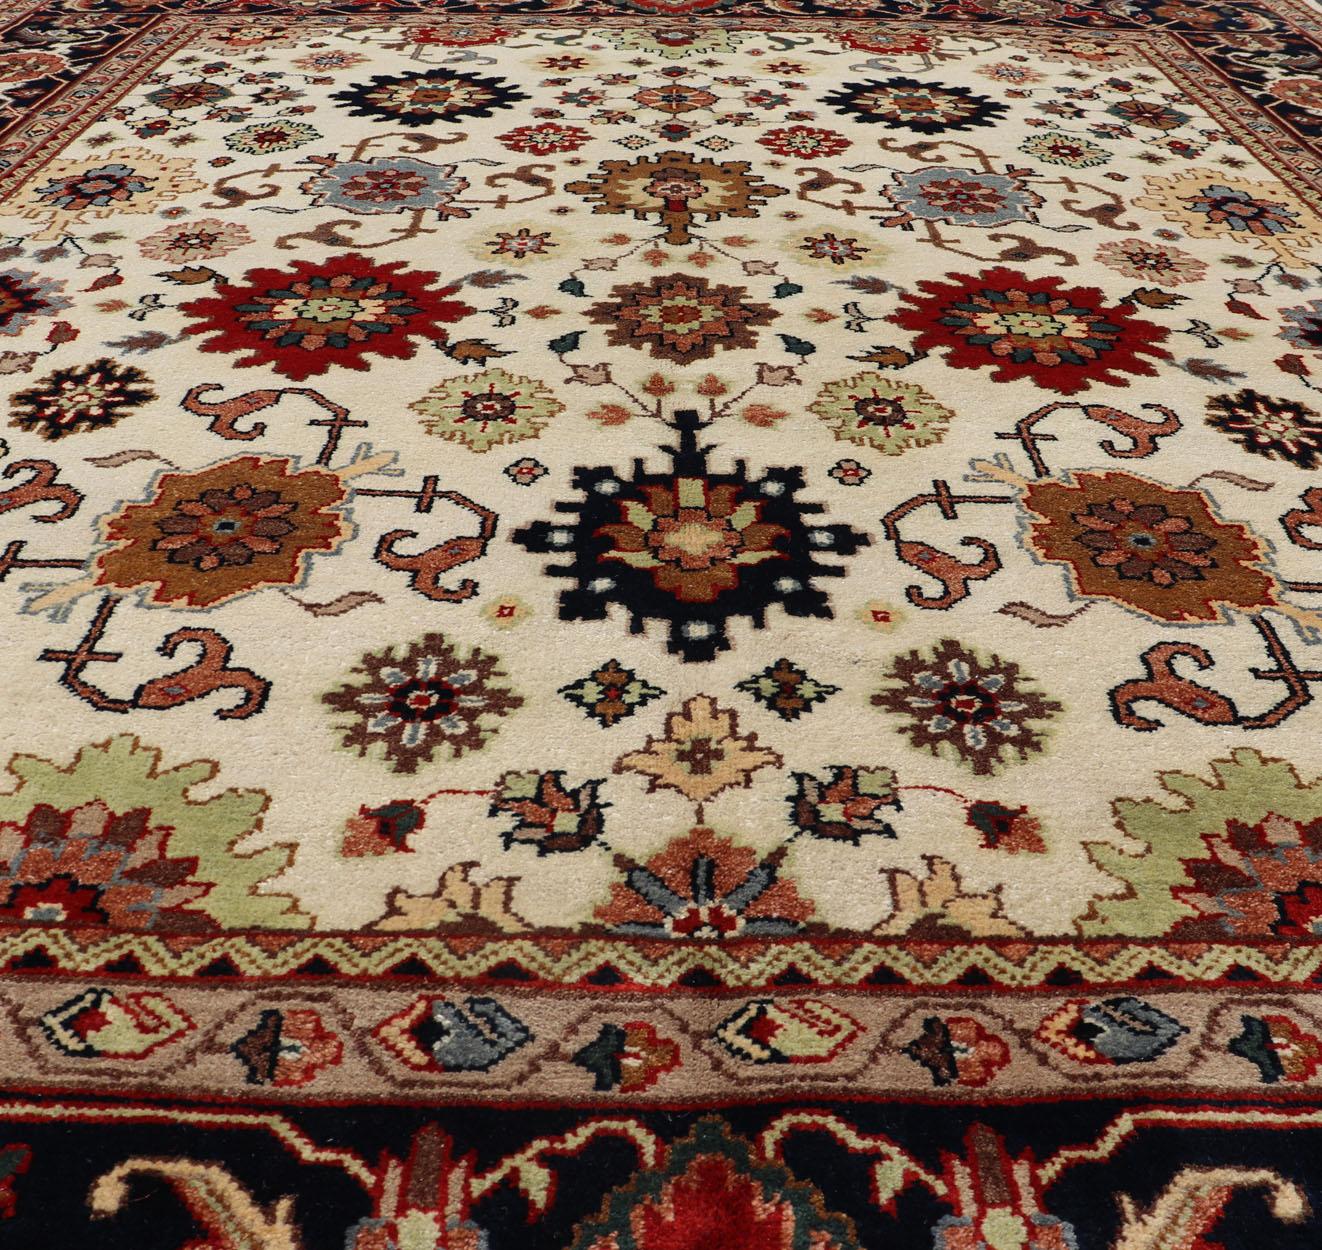 Beautiful modern Mahal-Sultanabad hand-knotted wool rug with a Traditional Design. This Mahal-Sultanabad rug has a multi-color accent in a gorgeous all-over floral design. Rug/PTA-2109-04 country of origin / type: India / Heriz, circa 21th